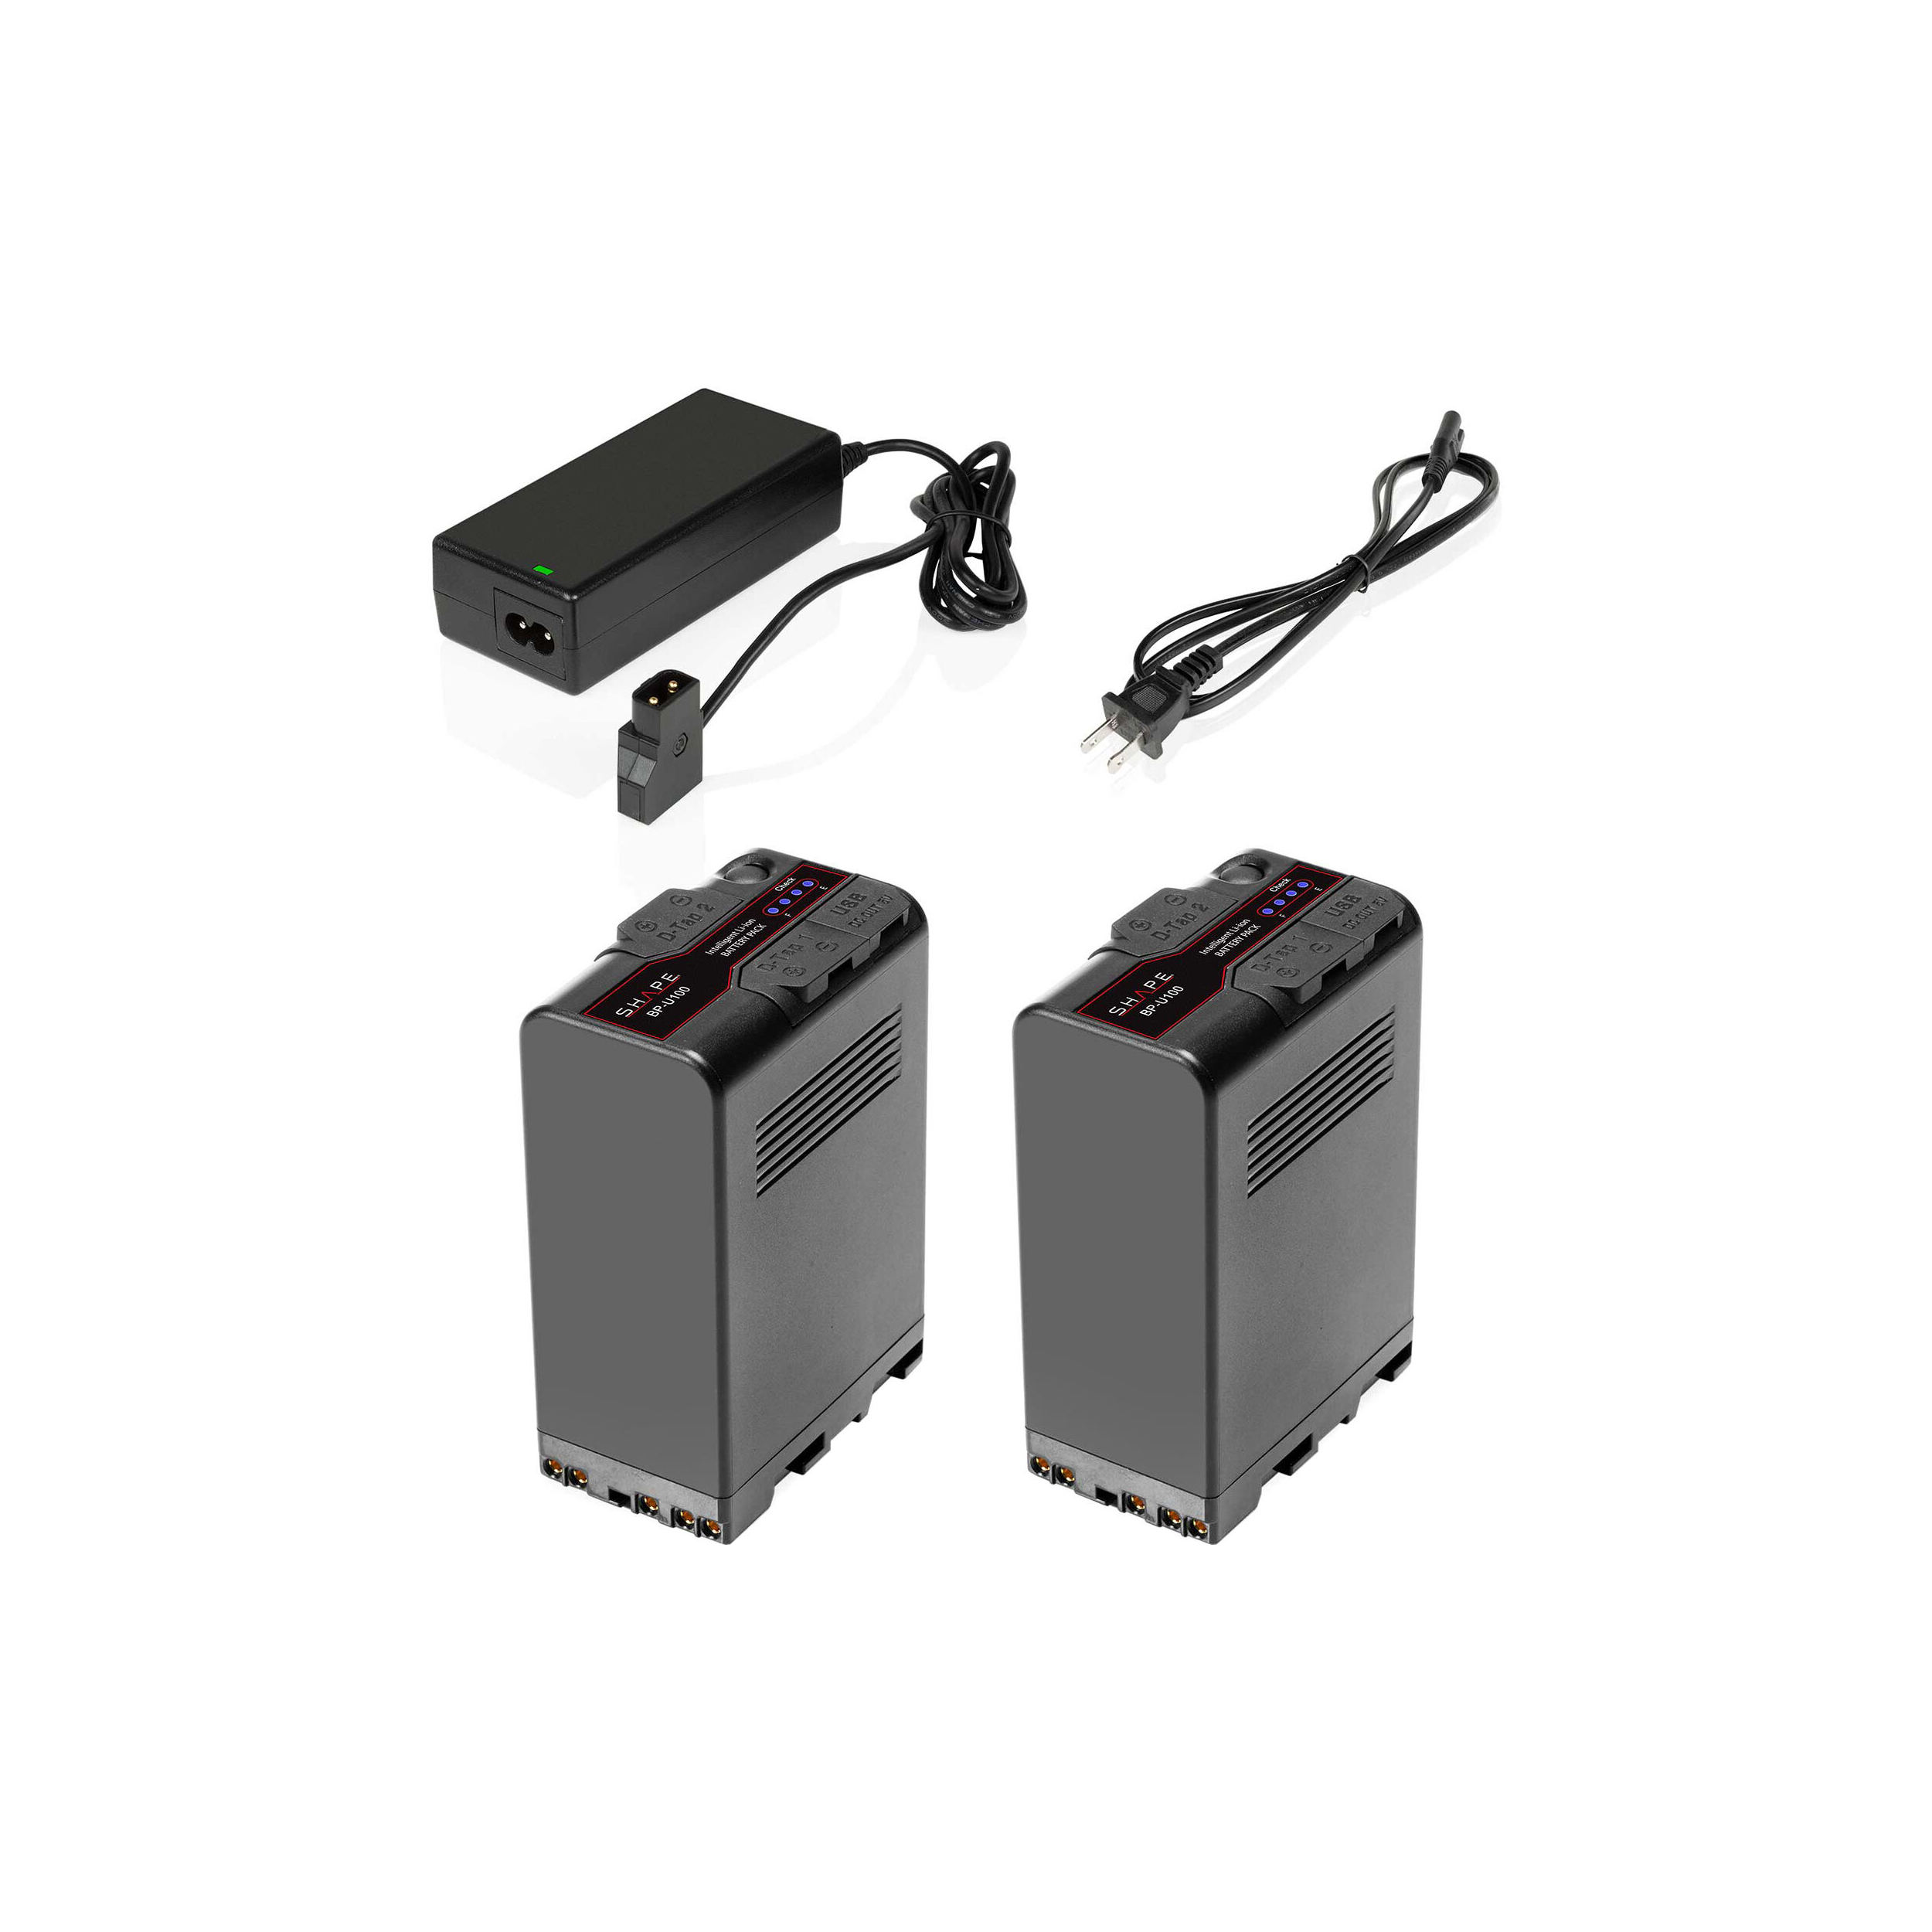 SHAPE Dual BP-U100 Lithium-Ion Batteries with Portable D-Tap Battery Charger (6800 mAh)